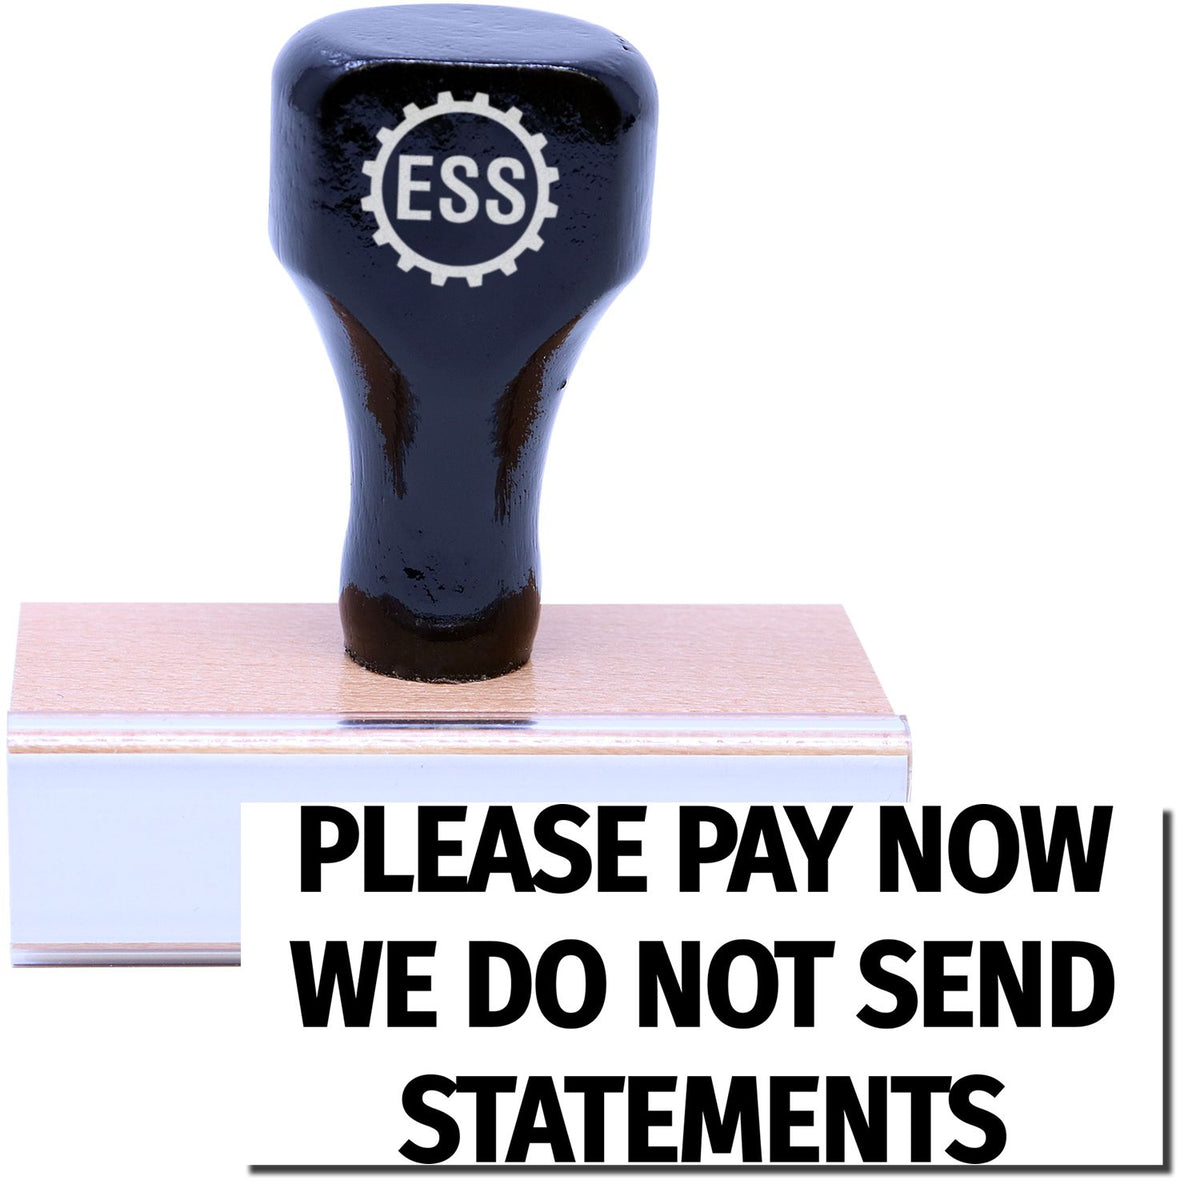 A stock office rubber stamp with a stamped image showing how the text &quot;PLEASE PAY NOW WE DO NOT SEND STATEMENTS&quot; in a large font is displayed after stamping.